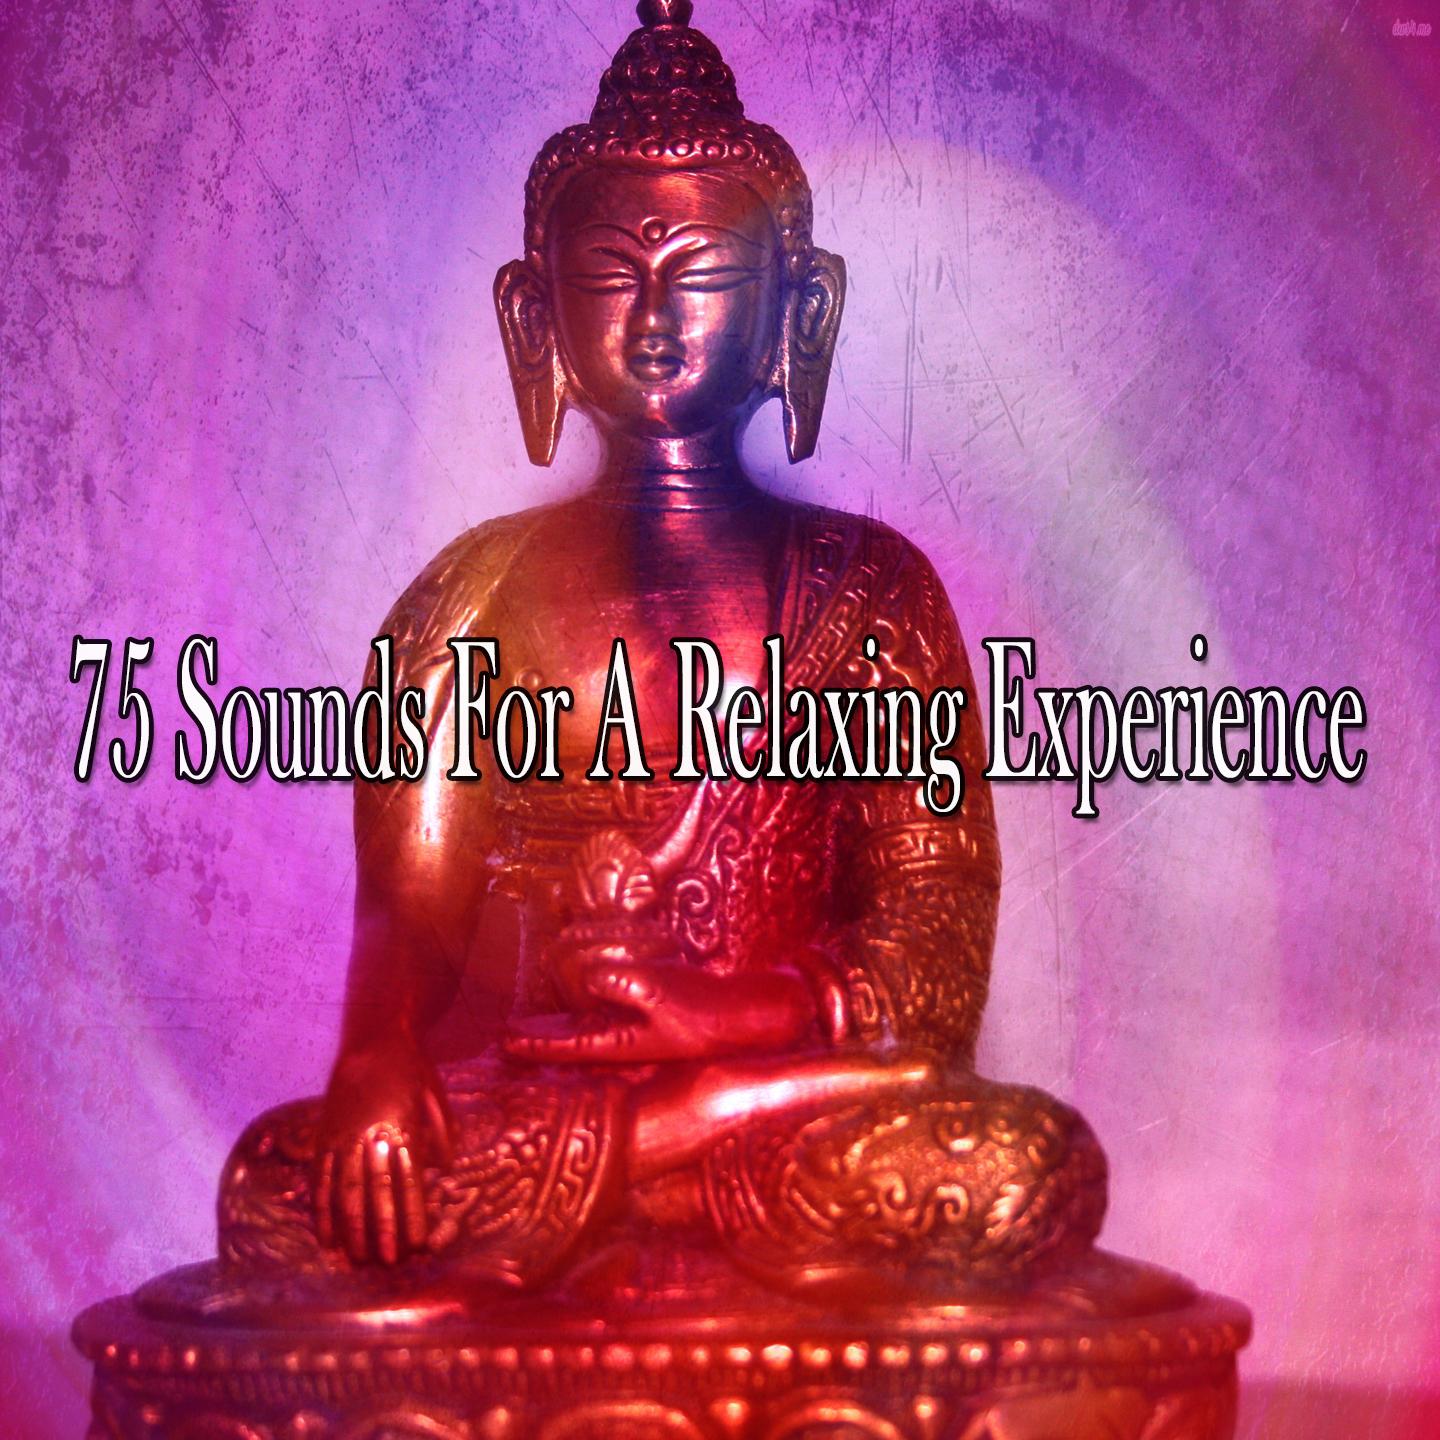 75 Sounds for a Relaxing Experience